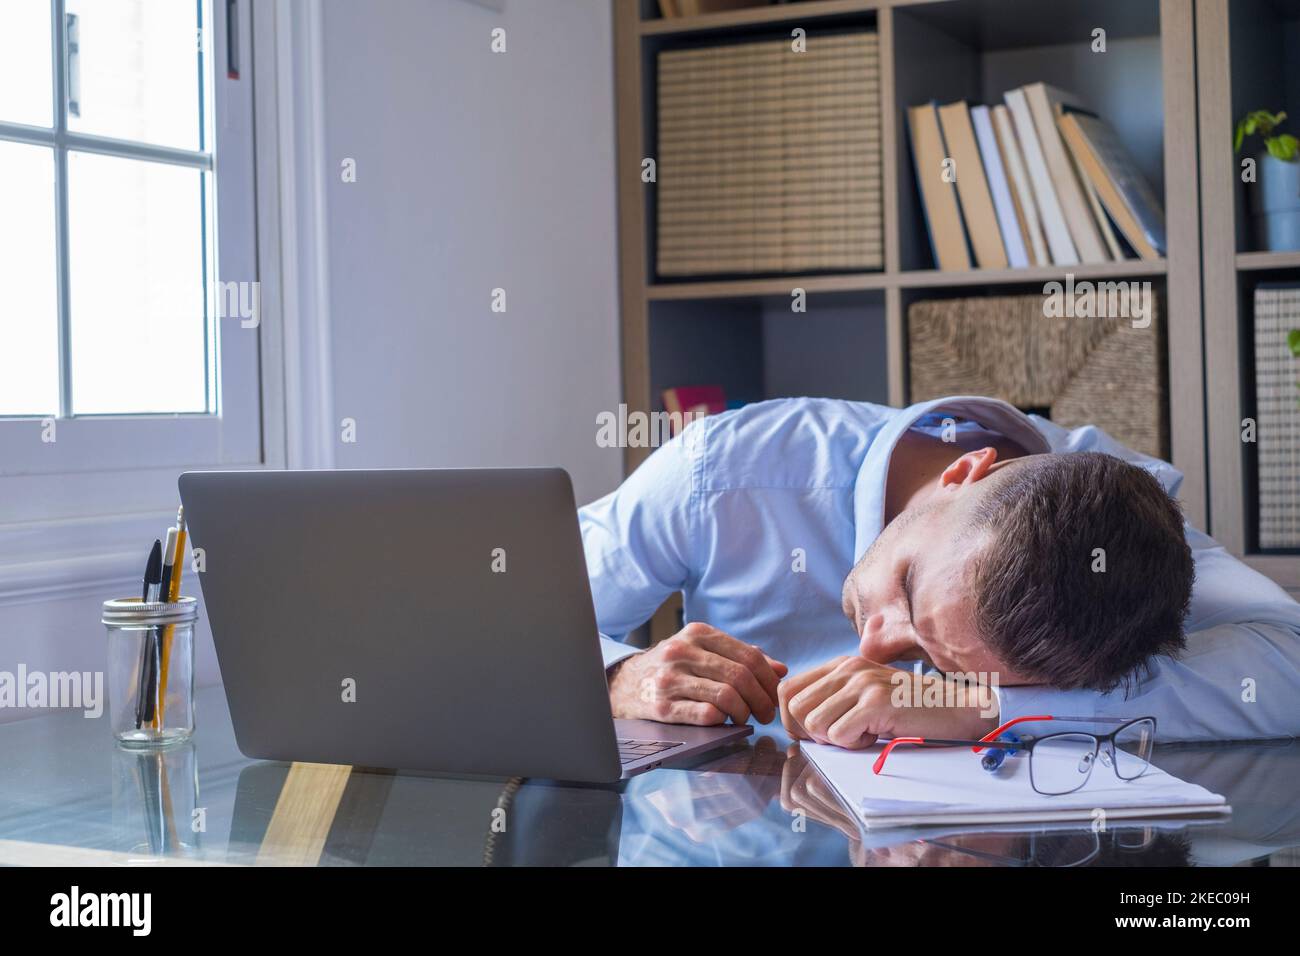 Tired businessman is sleeping at his work desk with laptop computer. Exhausted caucasian guy lying on table with eyes closed falling asleep. Male executive sleeping at workplace, boring routine work Stock Photo